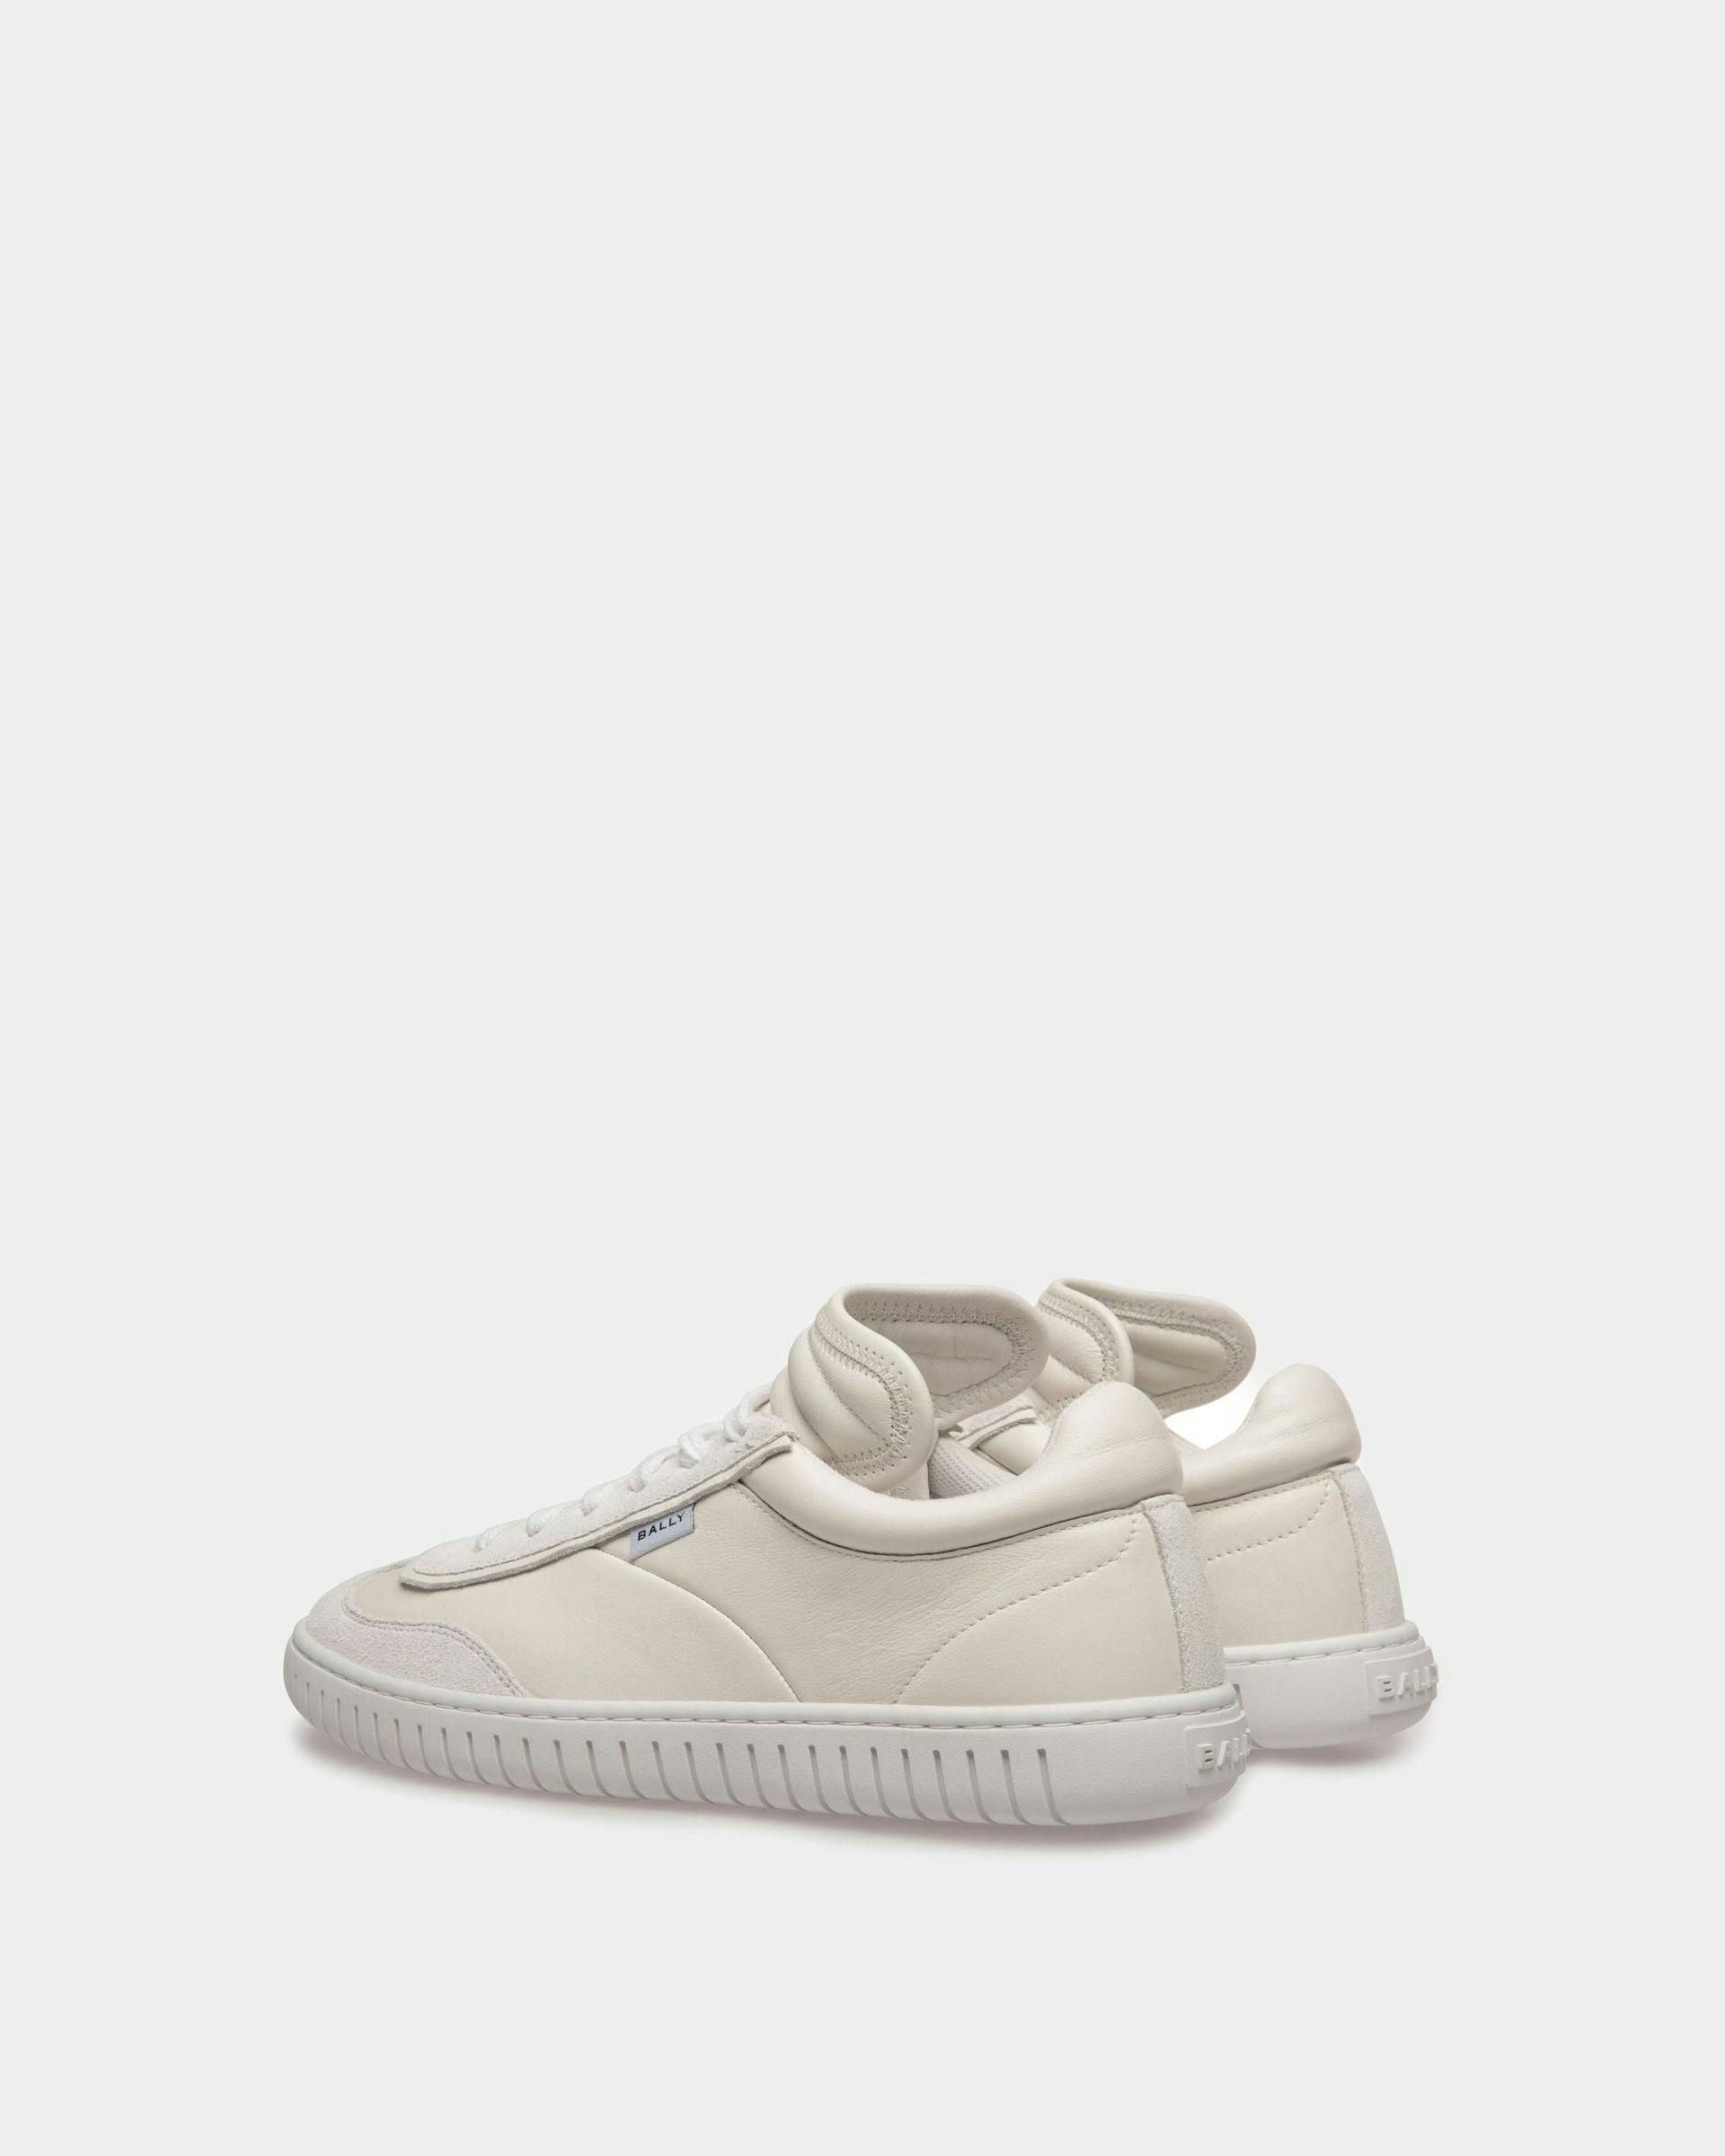 Women's Player Sneakers In White Leather | Bally | Still Life 3/4 Back